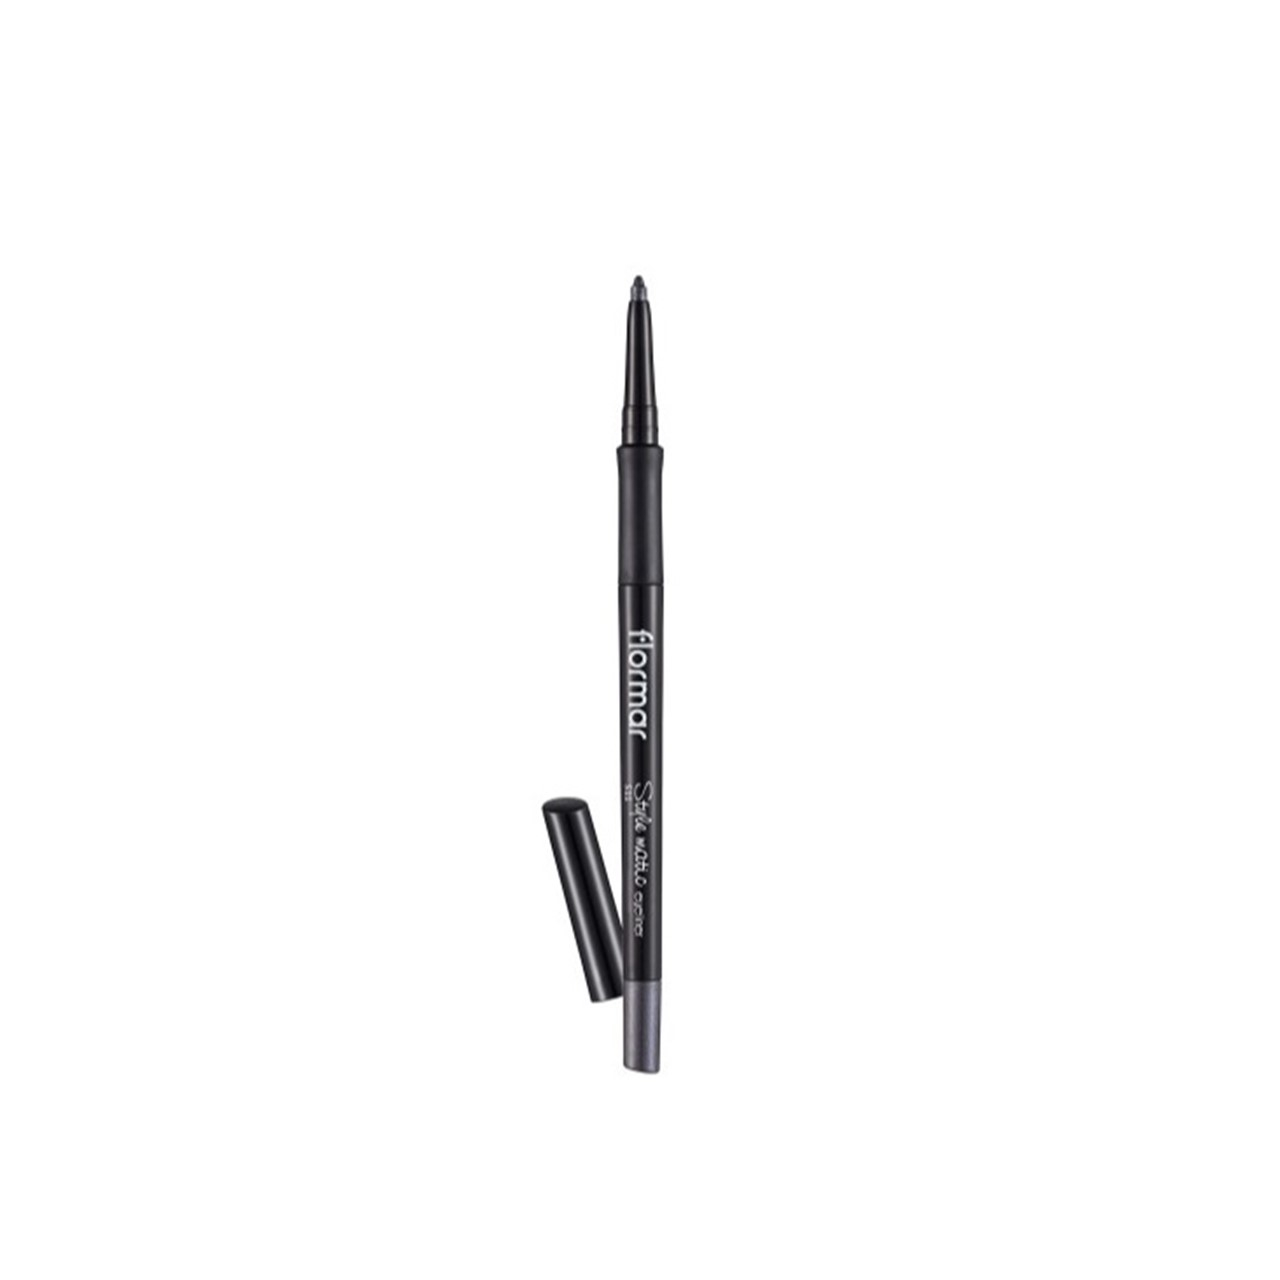 Flormar Stylematic Eyeliner 07 Starry Clouds 0.35g